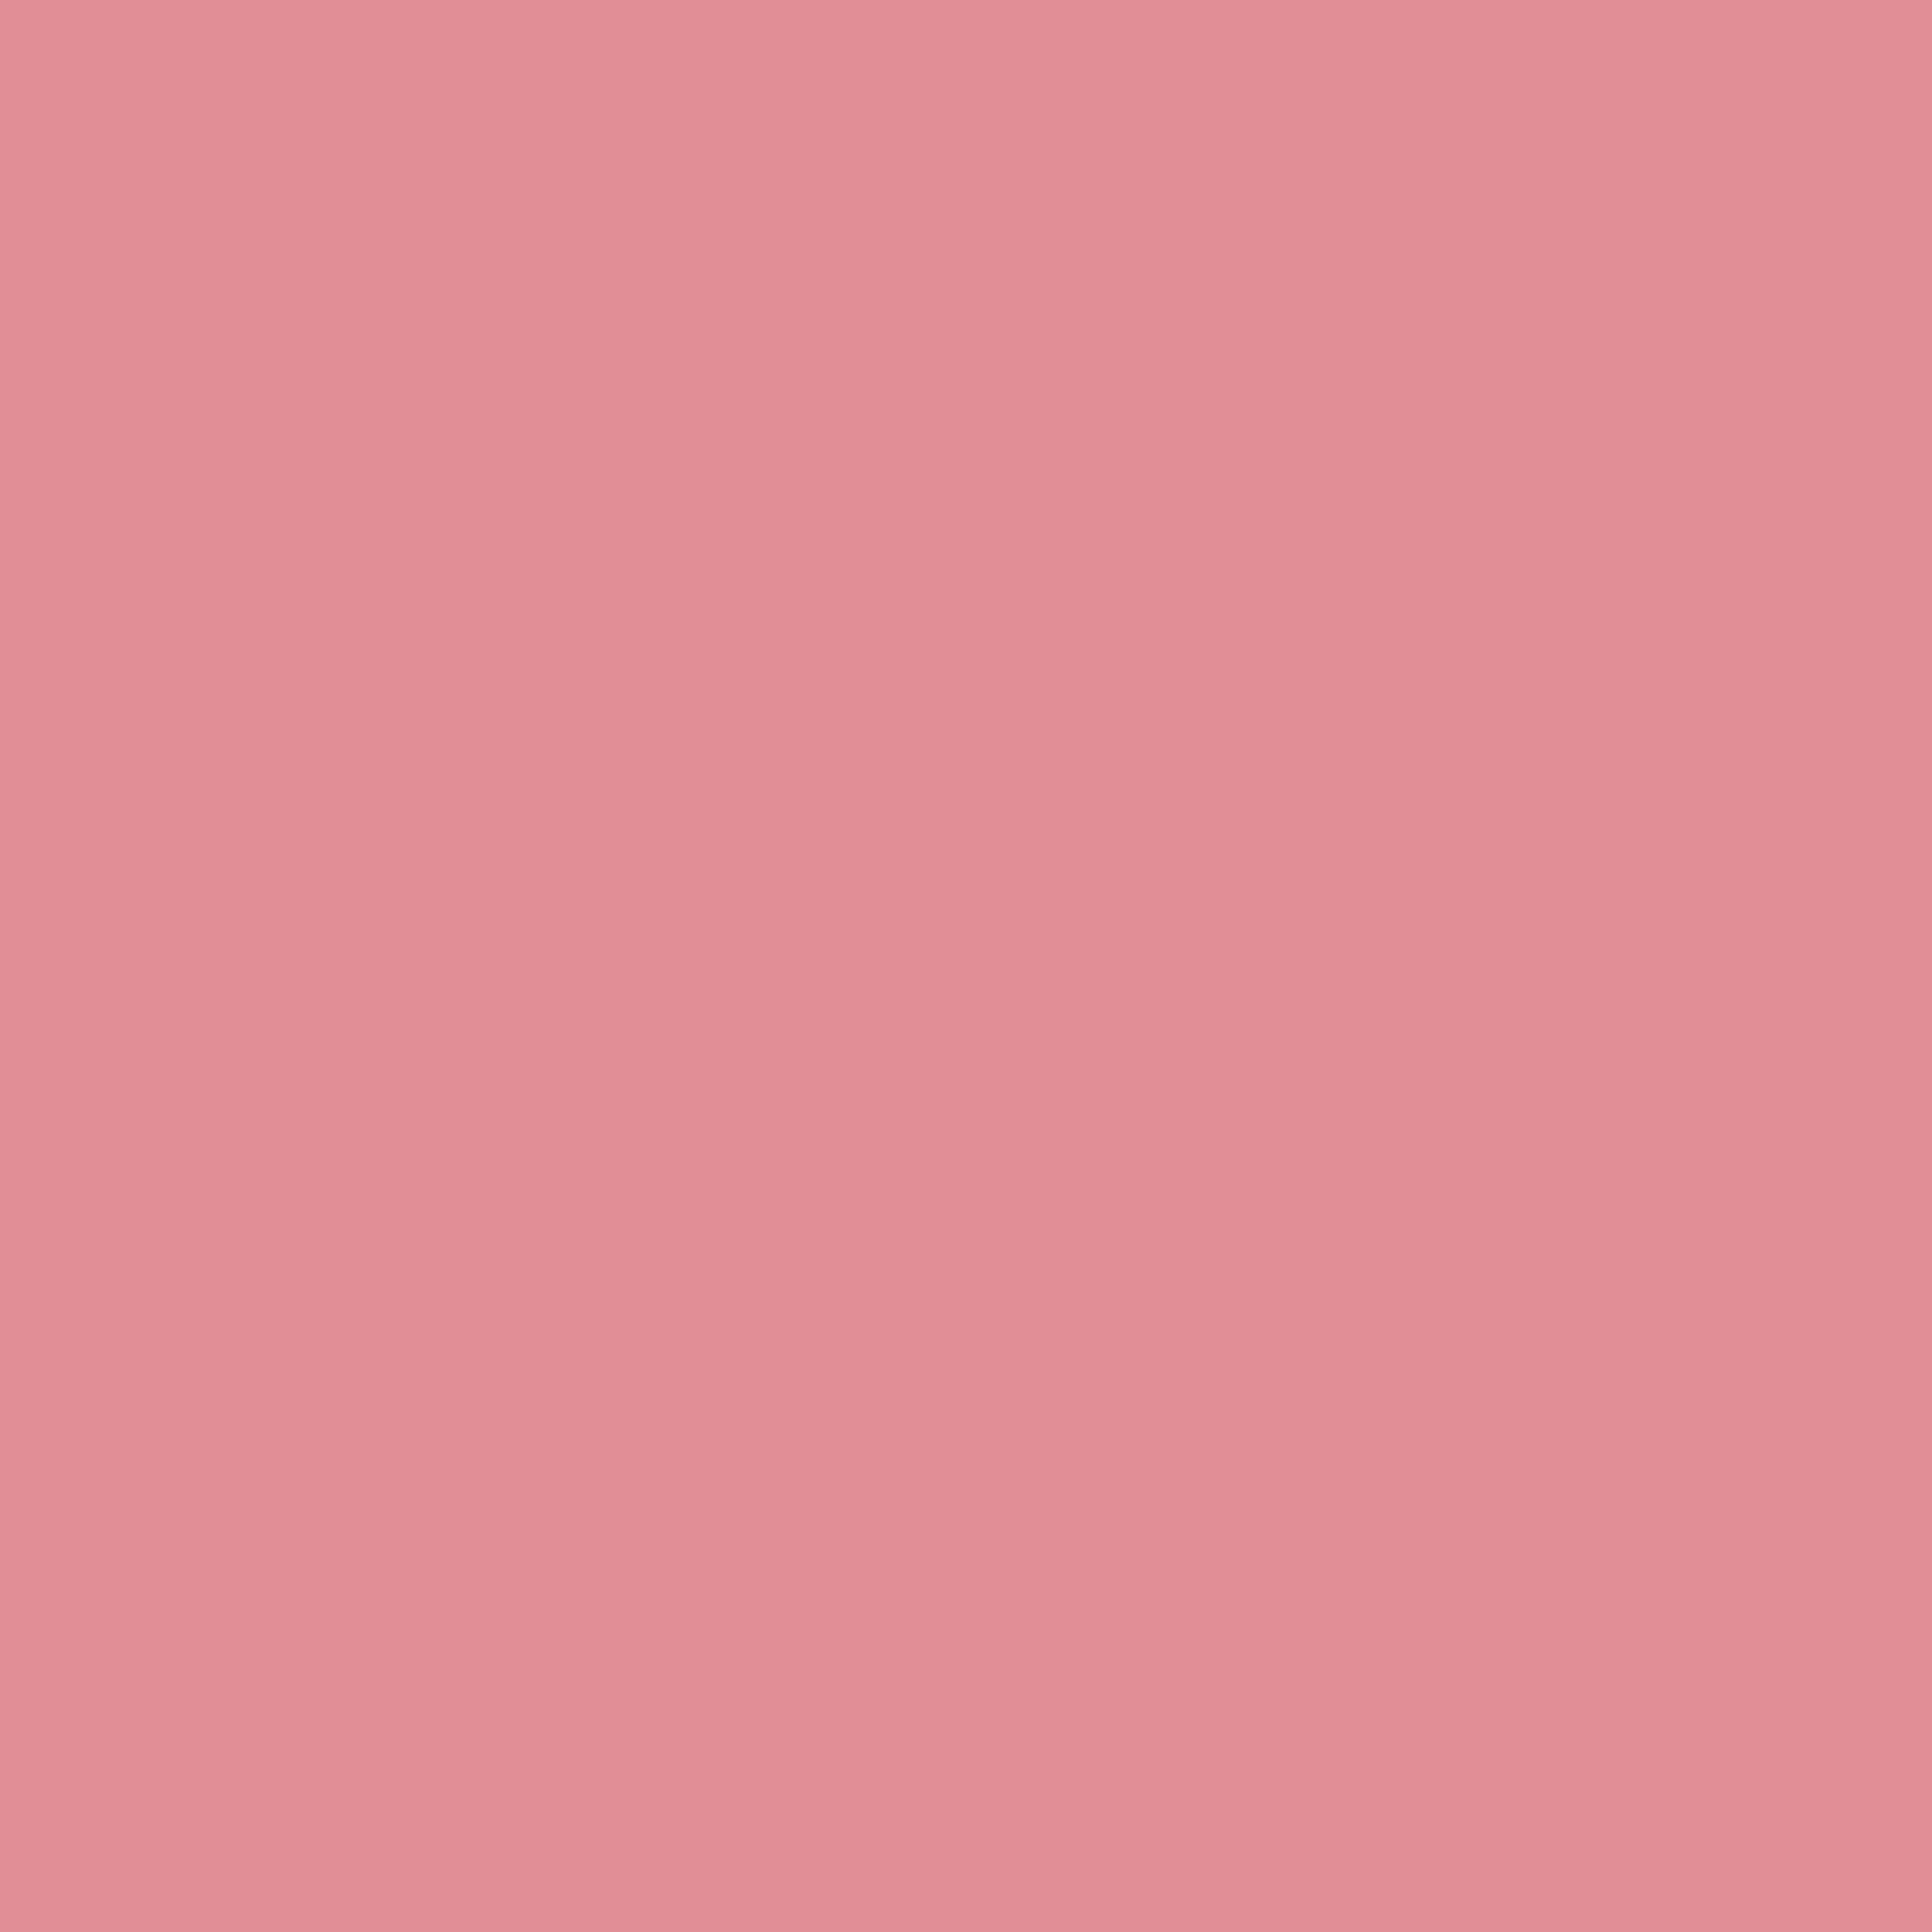 2732x2732 Ruddy Pink Solid Color Background